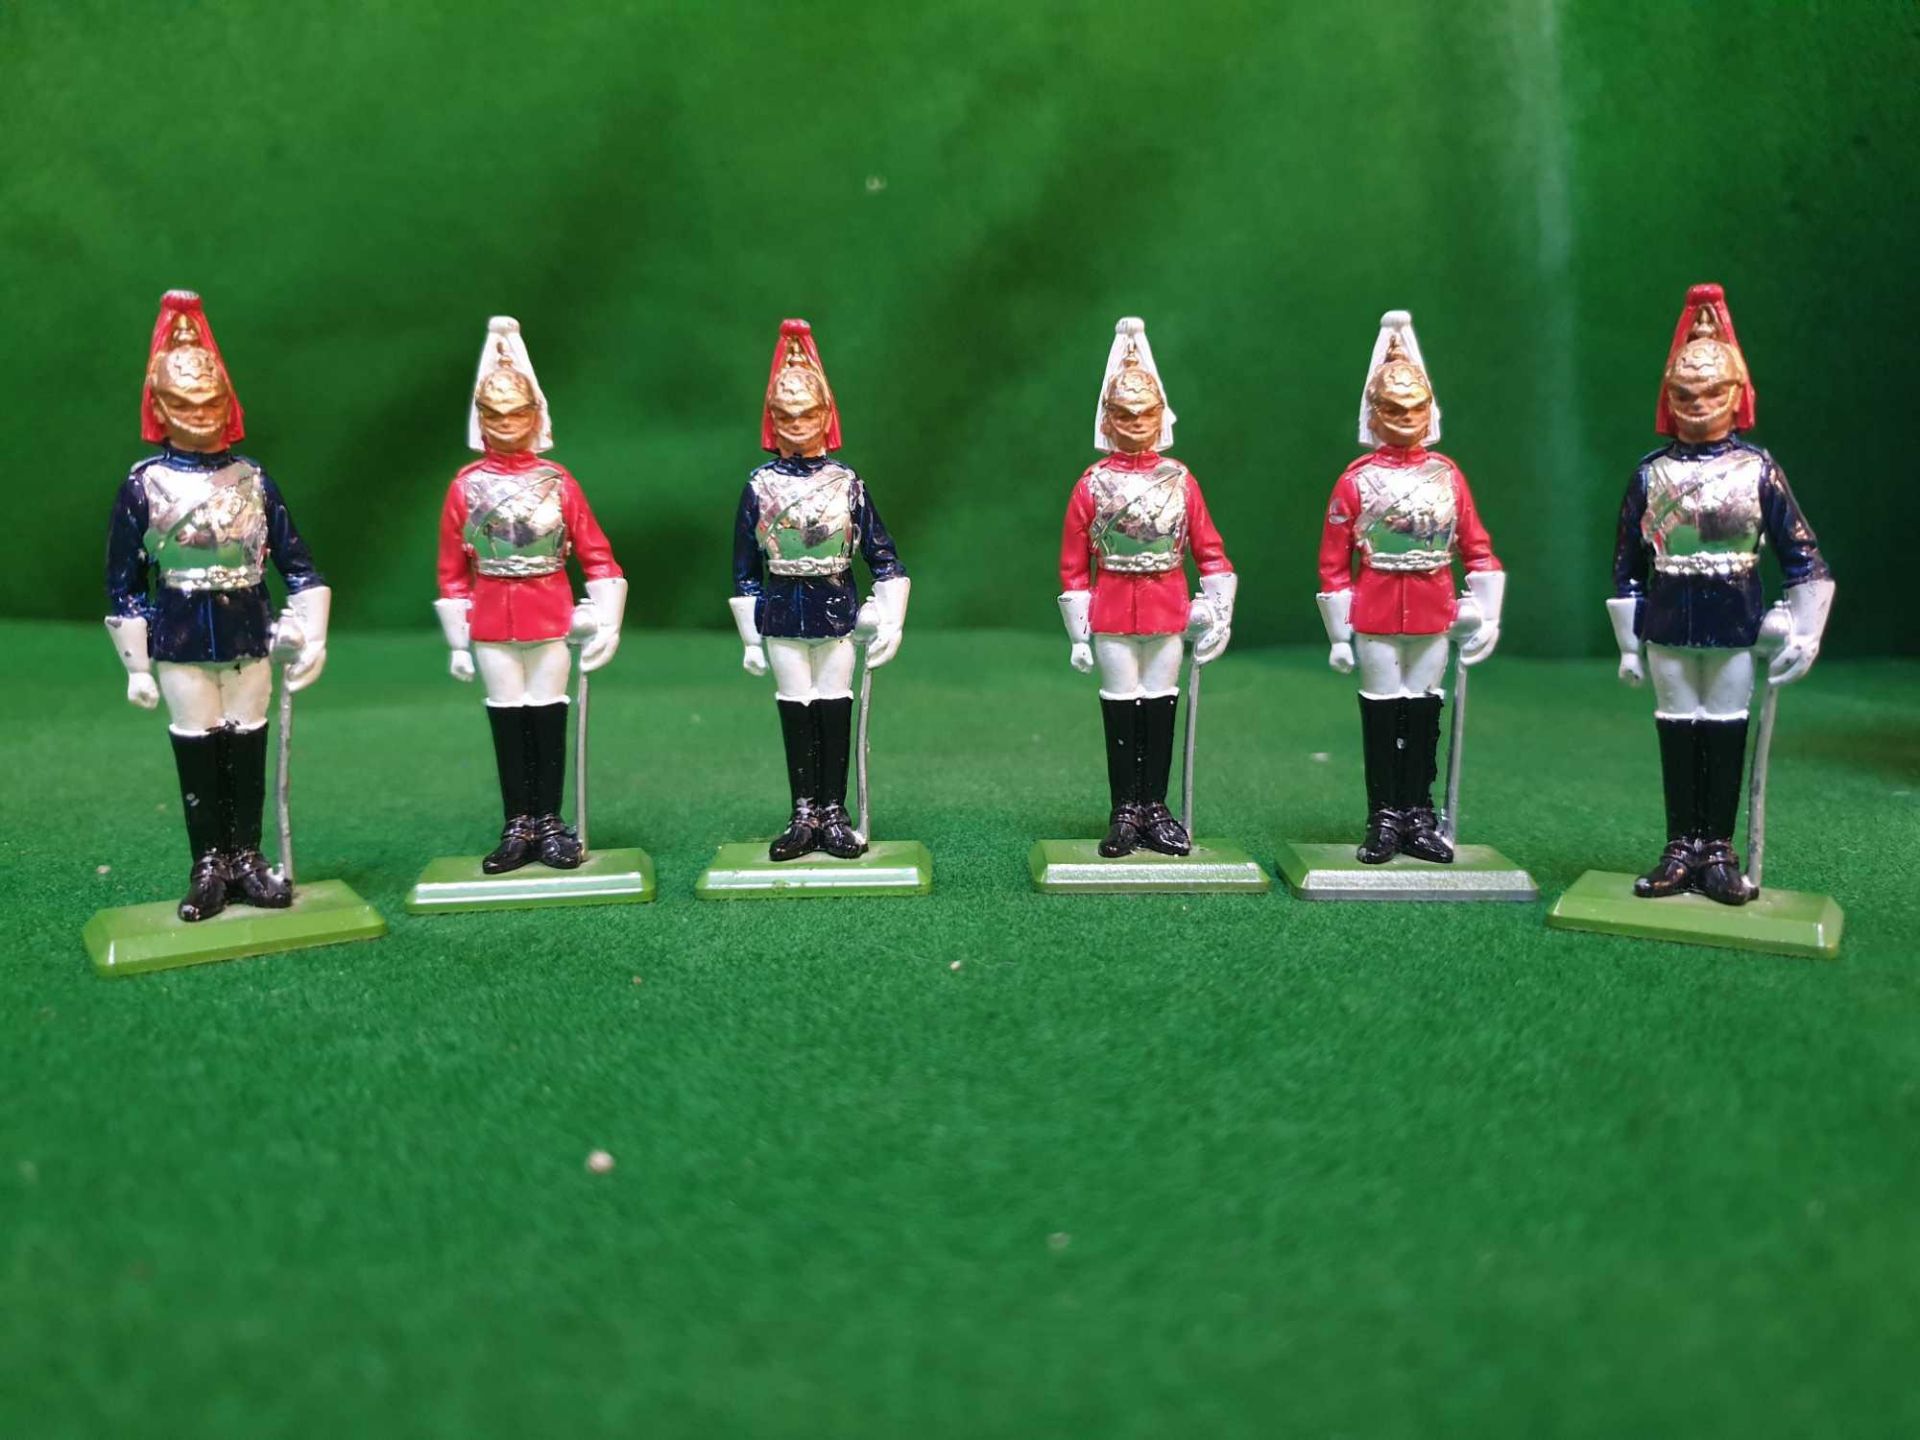 6 X W Britains 1973 Life Guard Figures The Life Guards Is The Senior Regiment Of The British Army